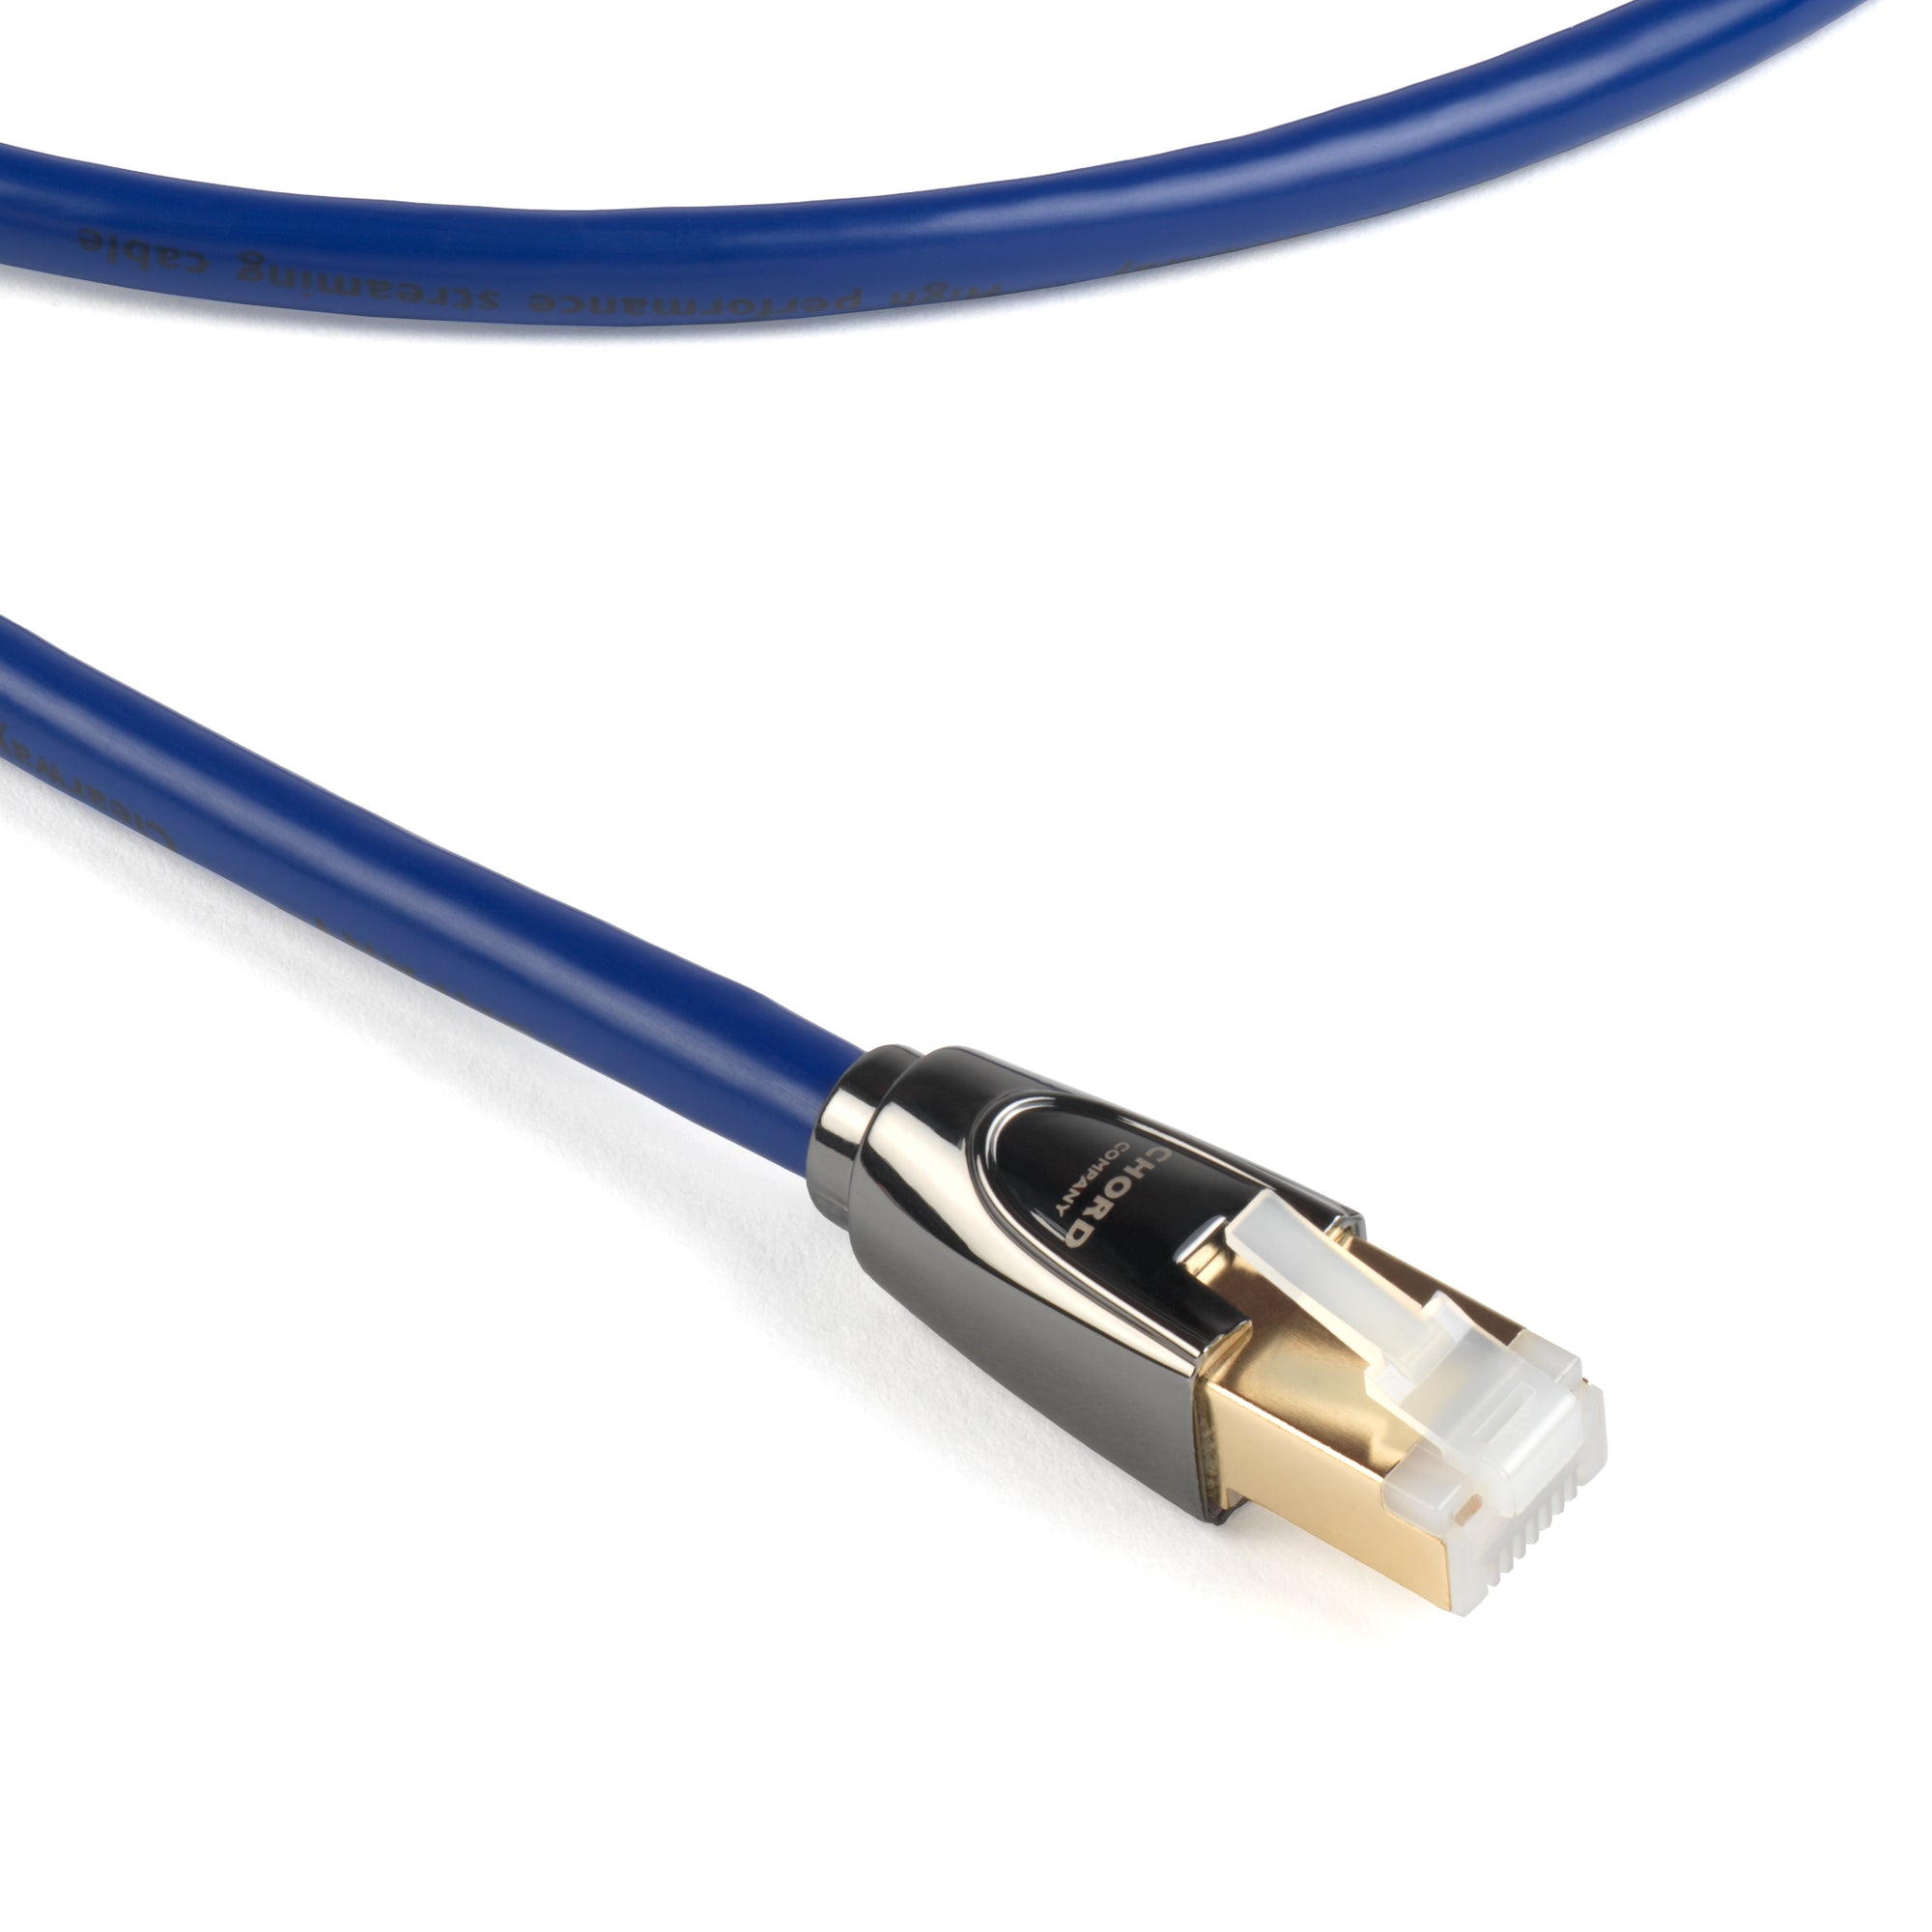 Chord Company - Clearway - Digital Streaming (RJ45) Interconnect Cable